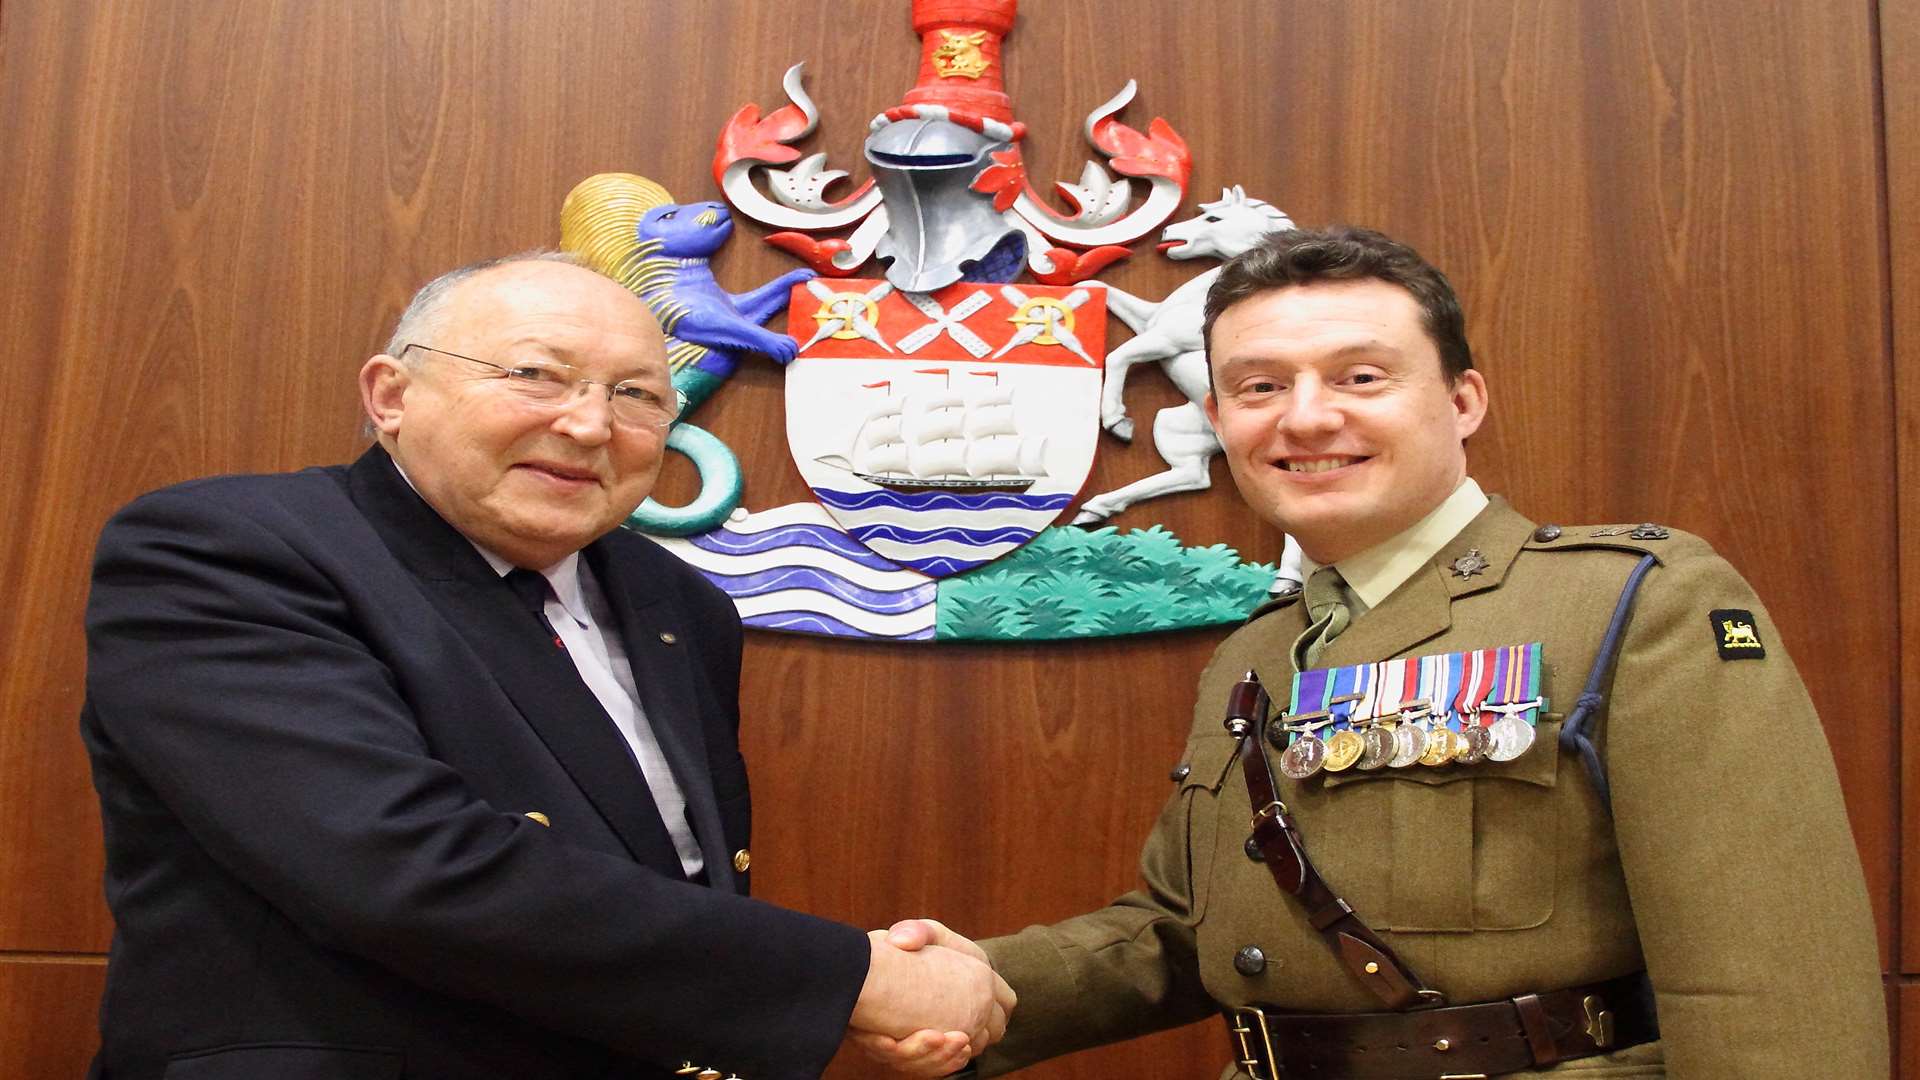 Council leader Cllr John Cubitt and Lt Col Andrew Betts, commanding officer of the 3rd battalion, The Princess of Wales Royal Regiment, were among the signatories